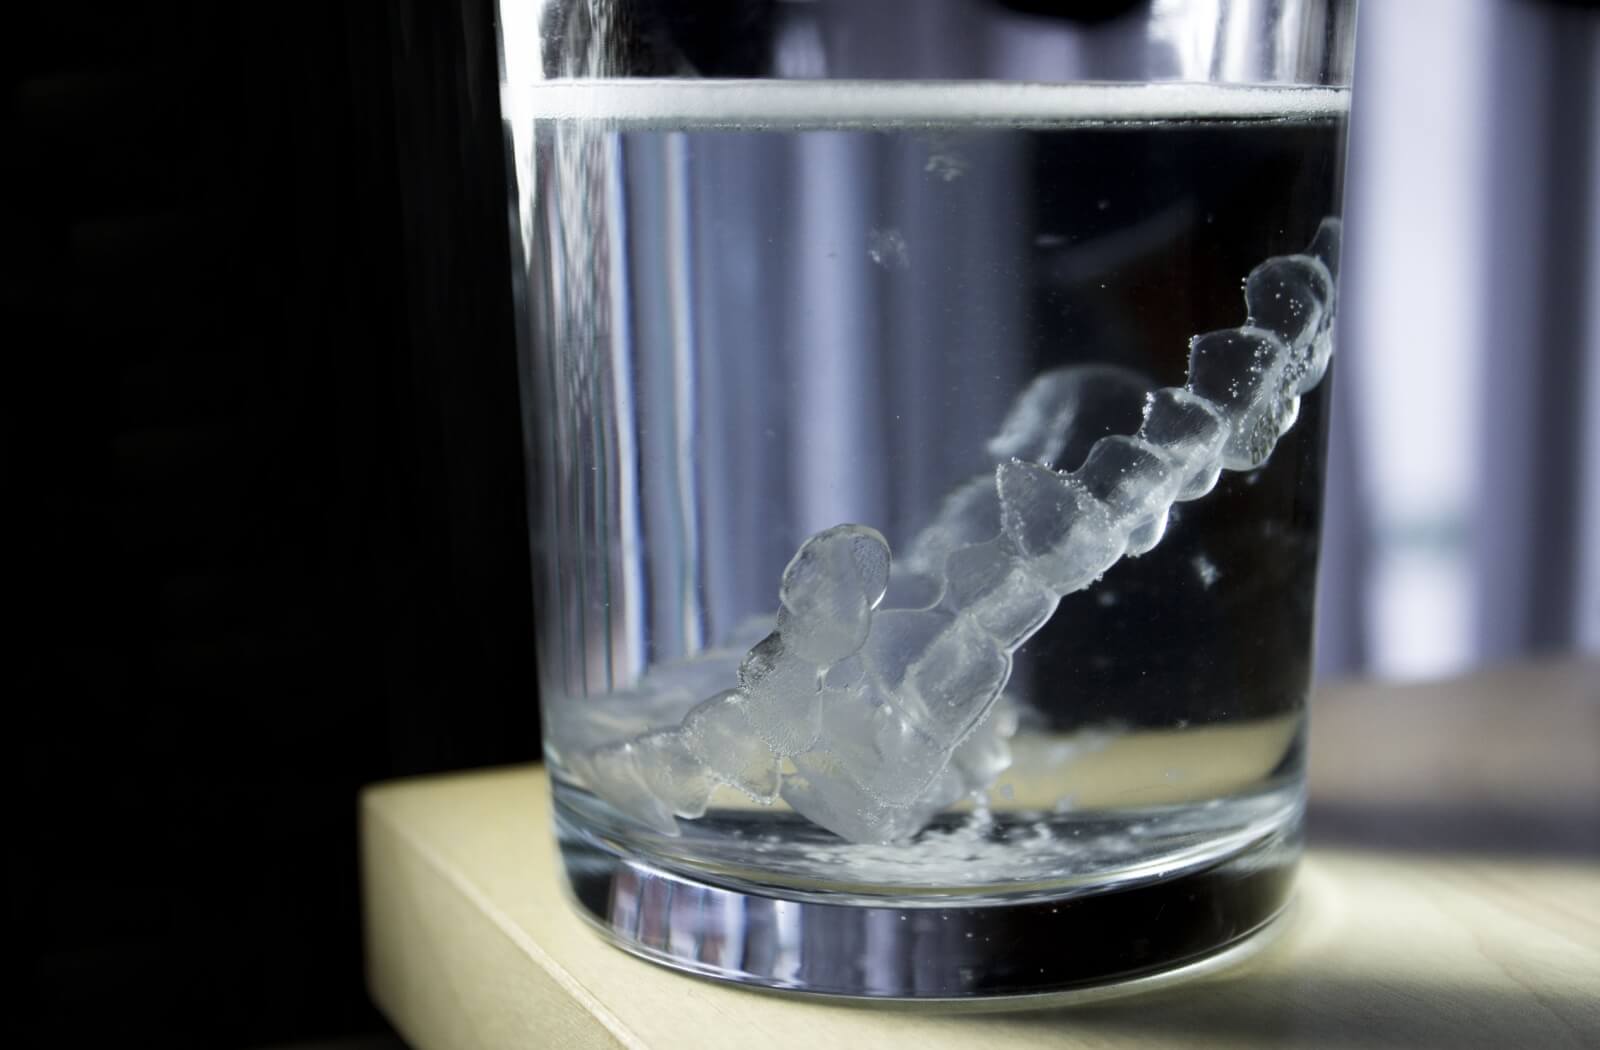 A pair of Invisalign aligners soaked in lukewarm water.